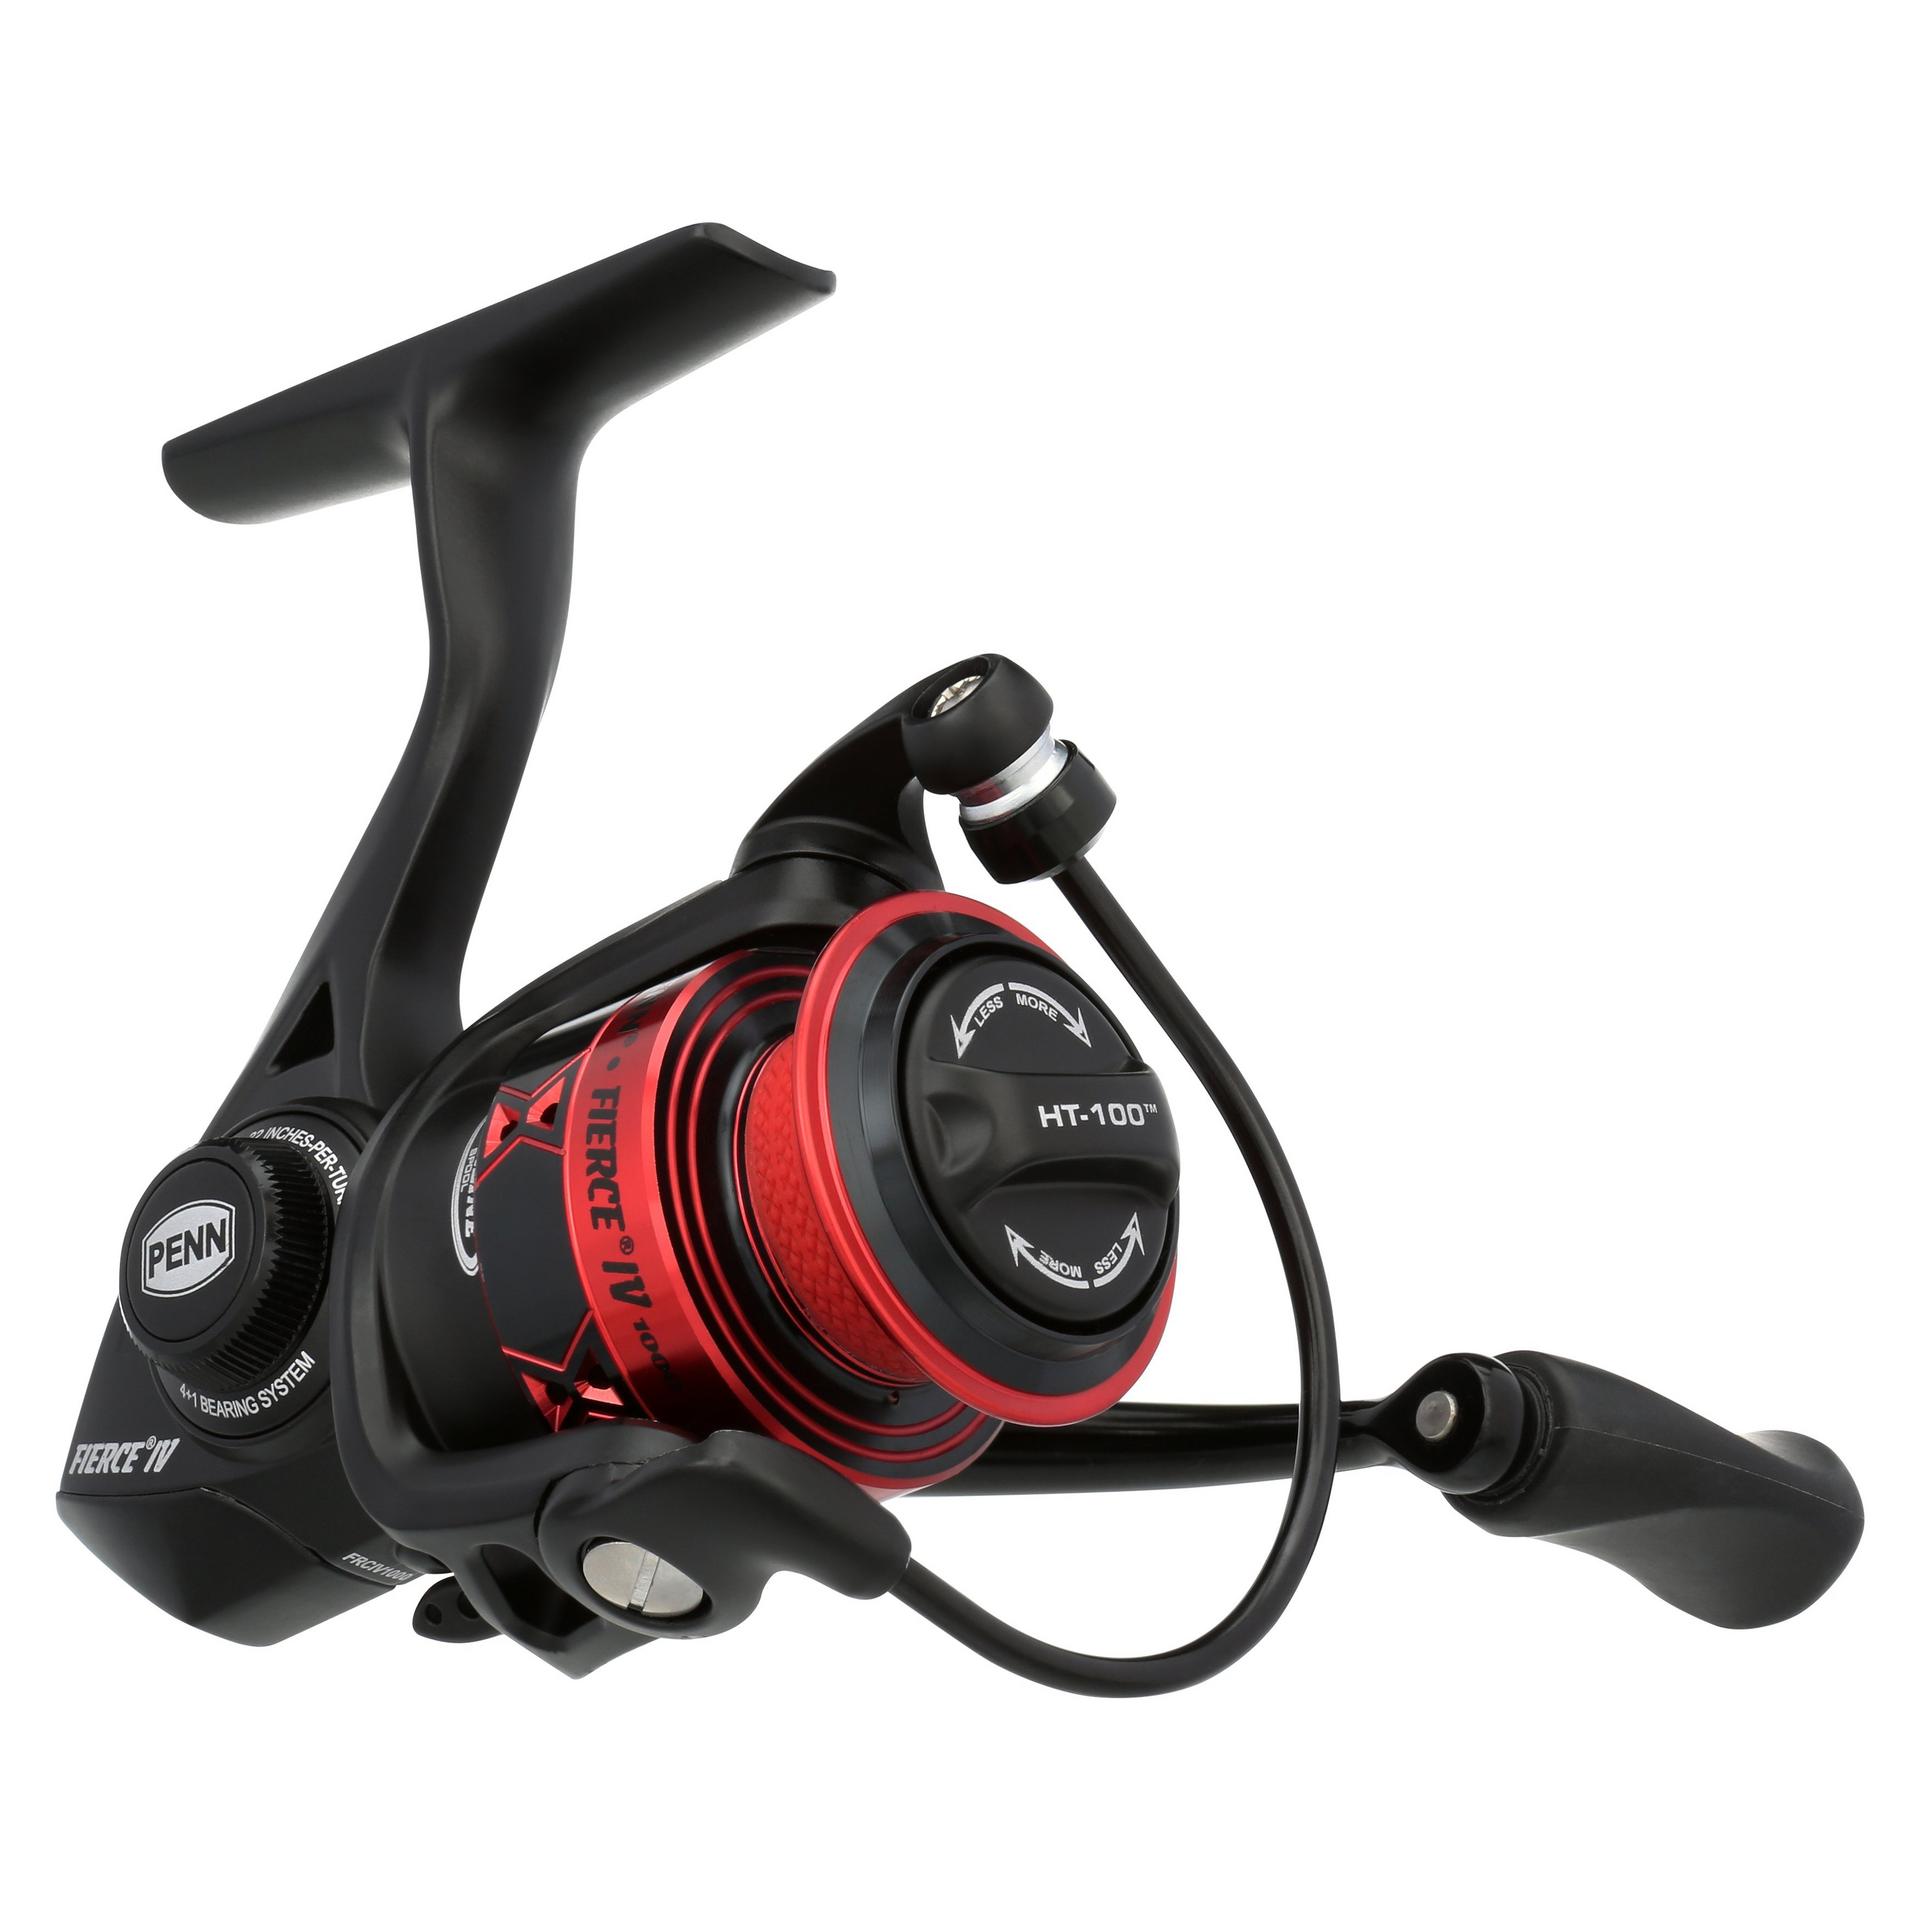 This Is The Best Reel Under the 100 Price Point